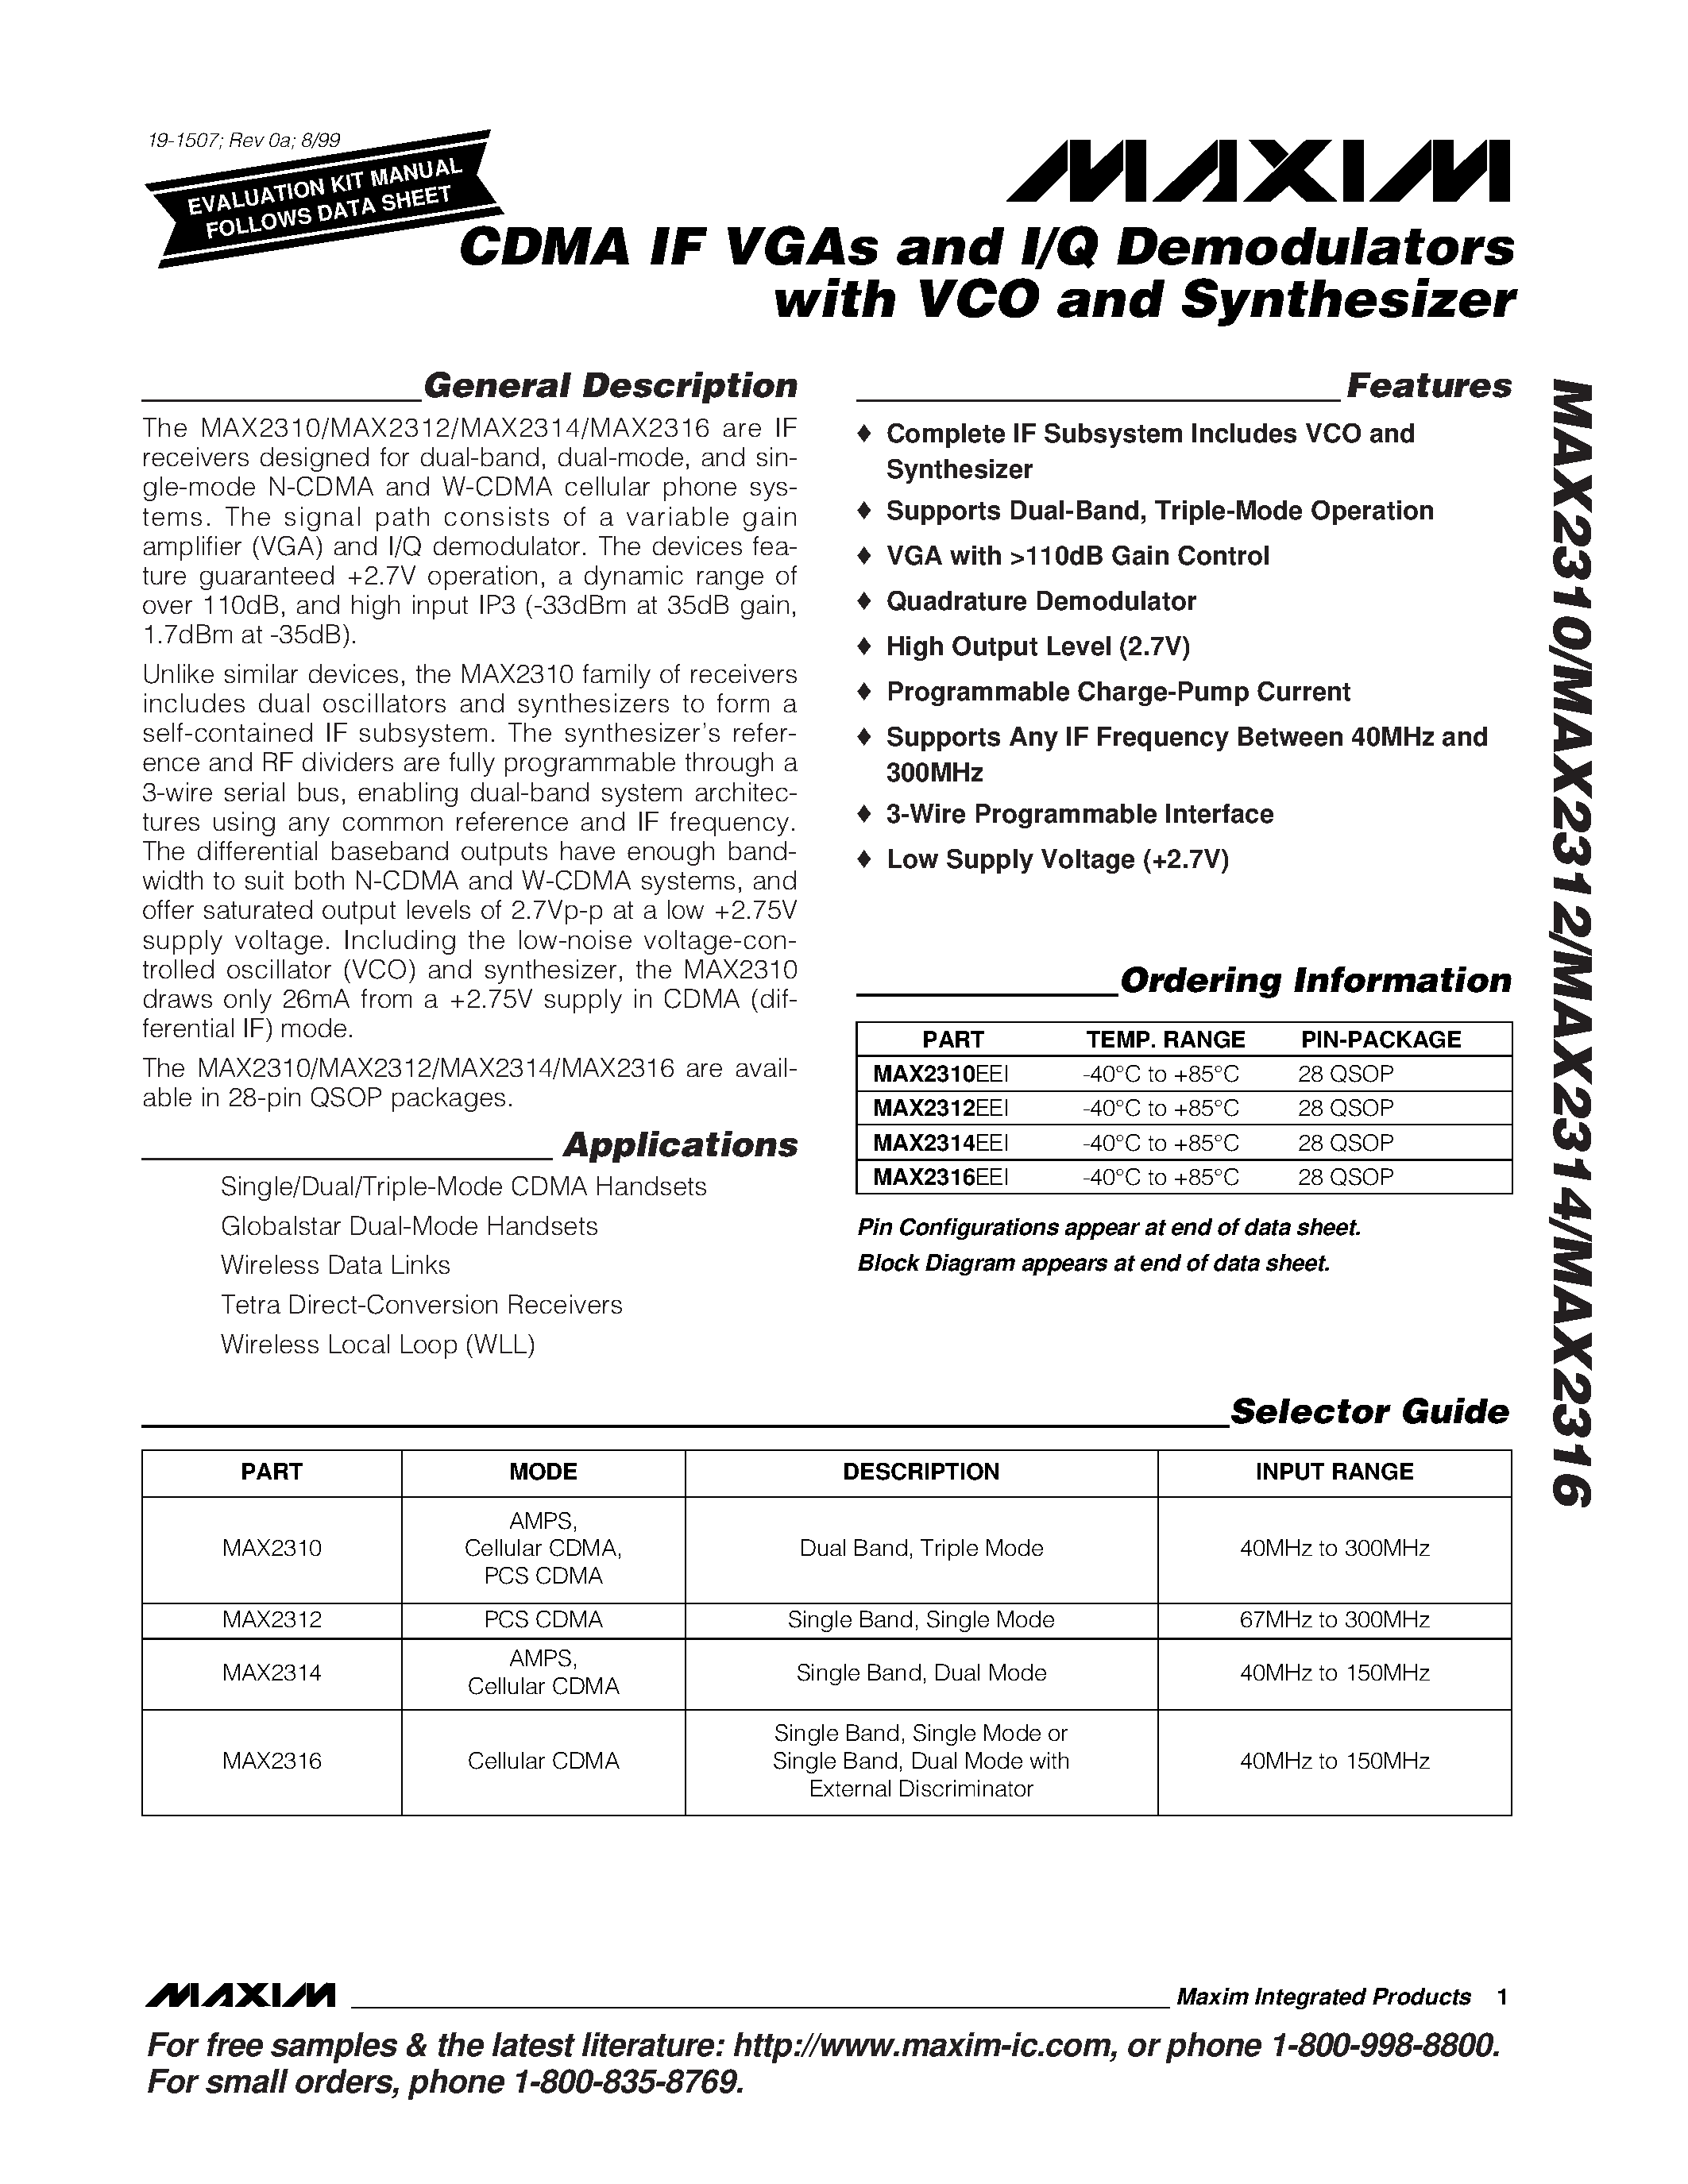 Datasheet MAX2312EEI - CDMA IF VGAs and I/Q Demodulators with VCO and Synthesizer page 1